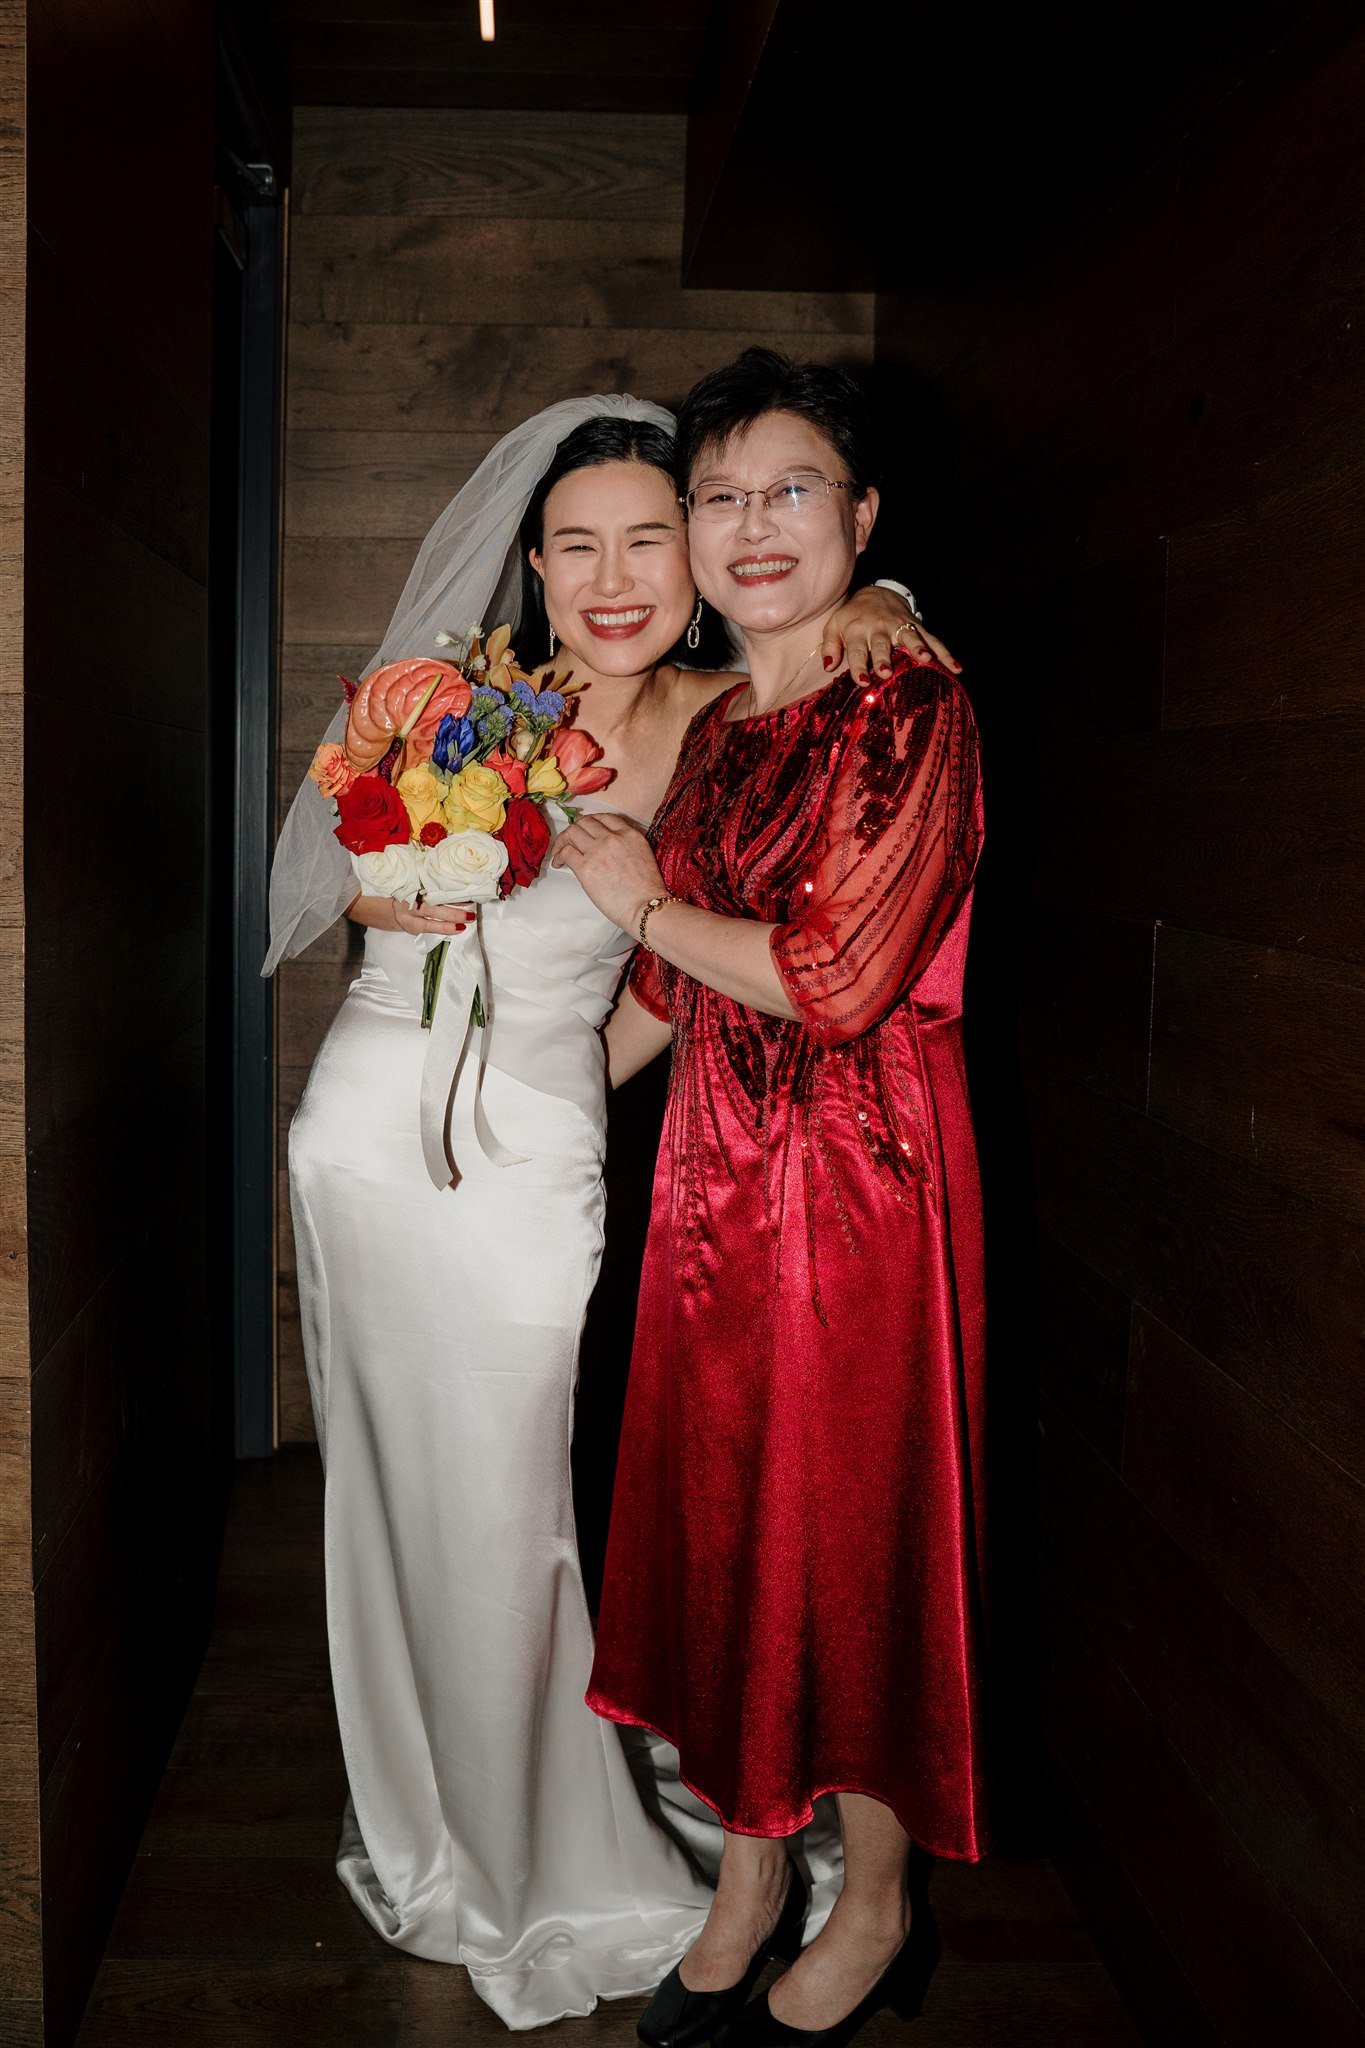 glasshouse-morningside-urban-best-auckland-wedding-venue-central-indoor-photographer-videographer-dear-white-productions-top-industrial-chinese-ceremony-tradition (58).jpg